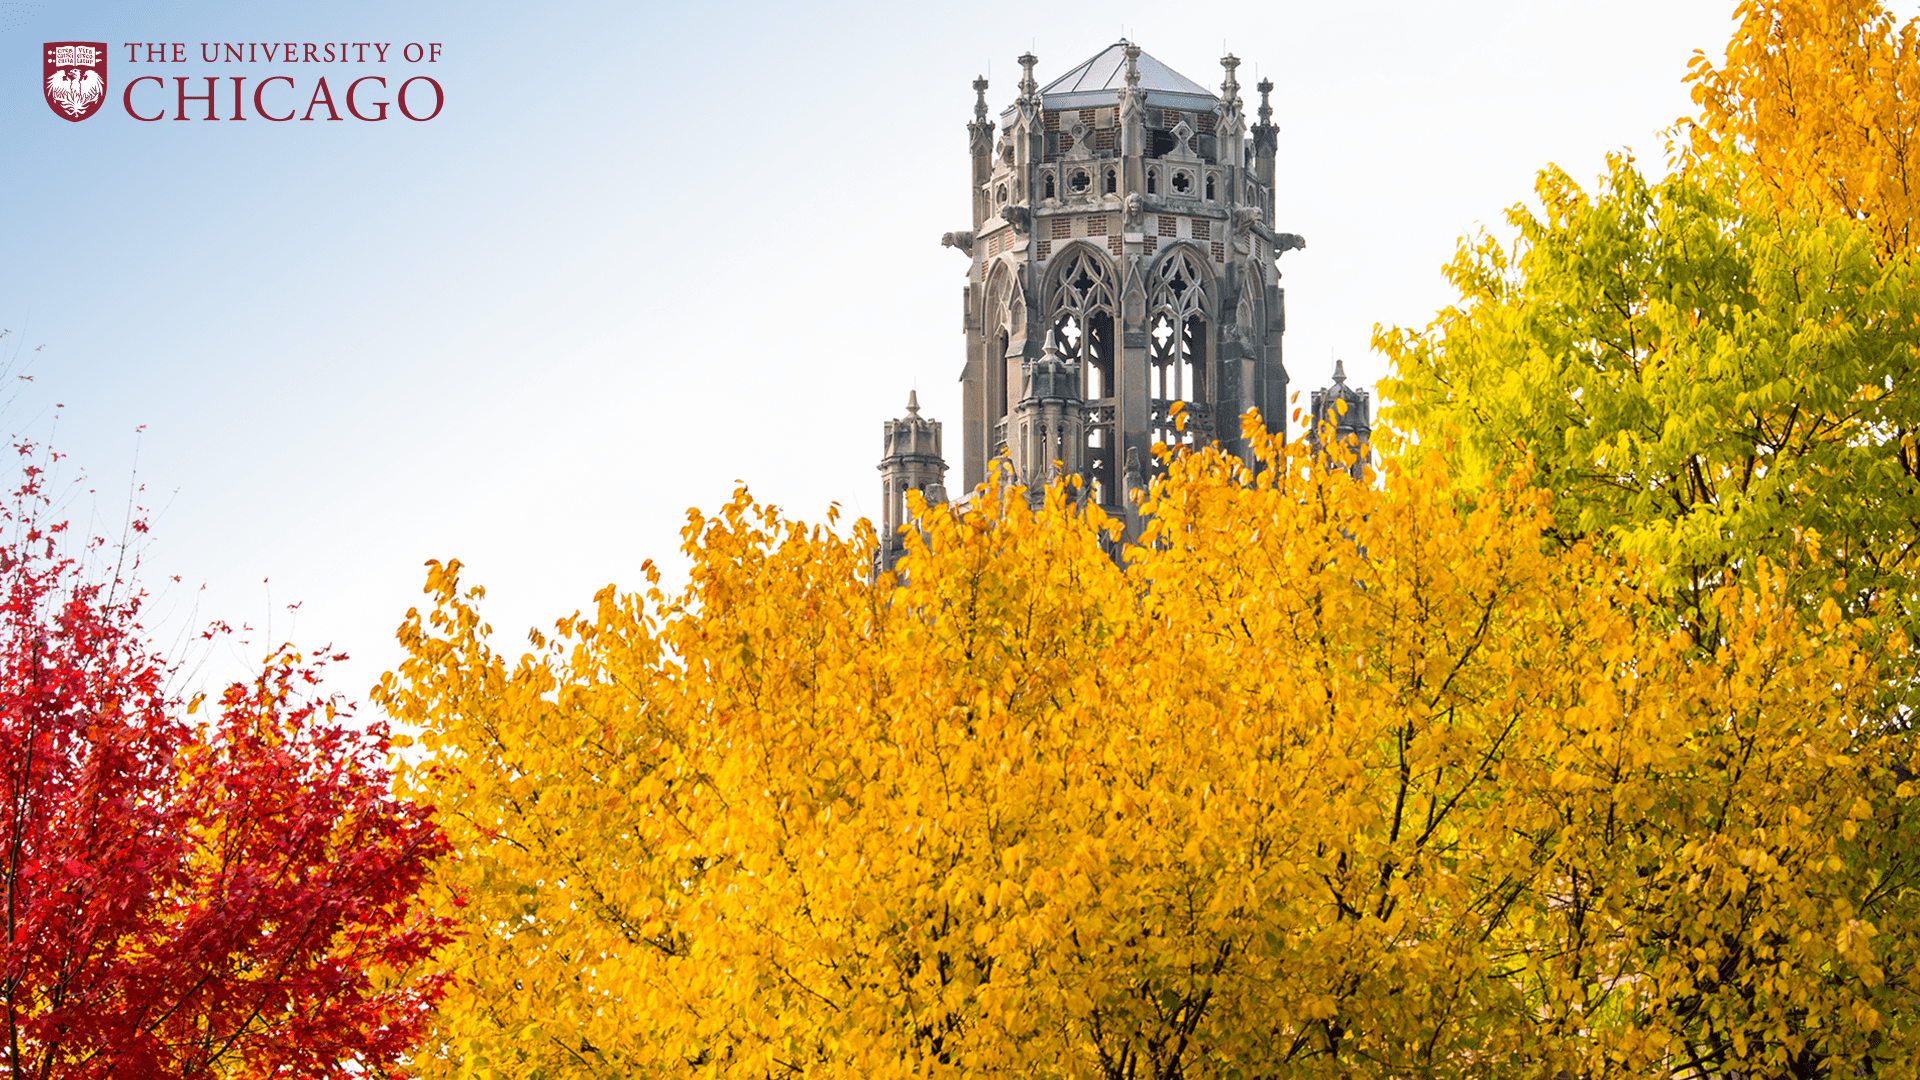 Gothic tower in background obscured by trees with bright yellow and red leaves